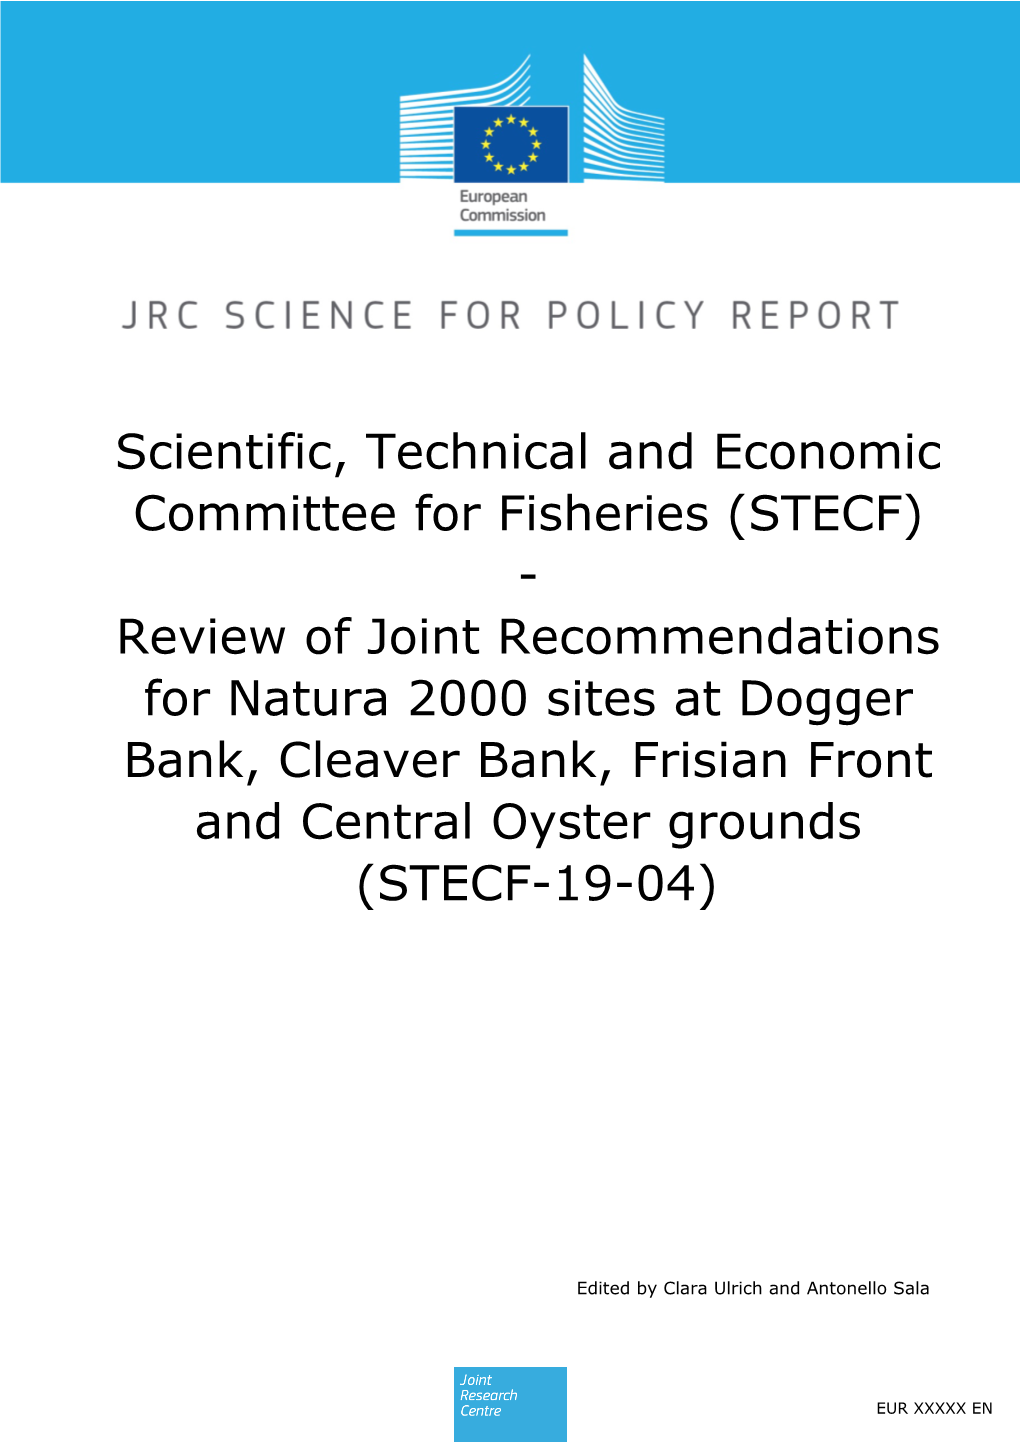 Scientific, Technical and Economic Committee For